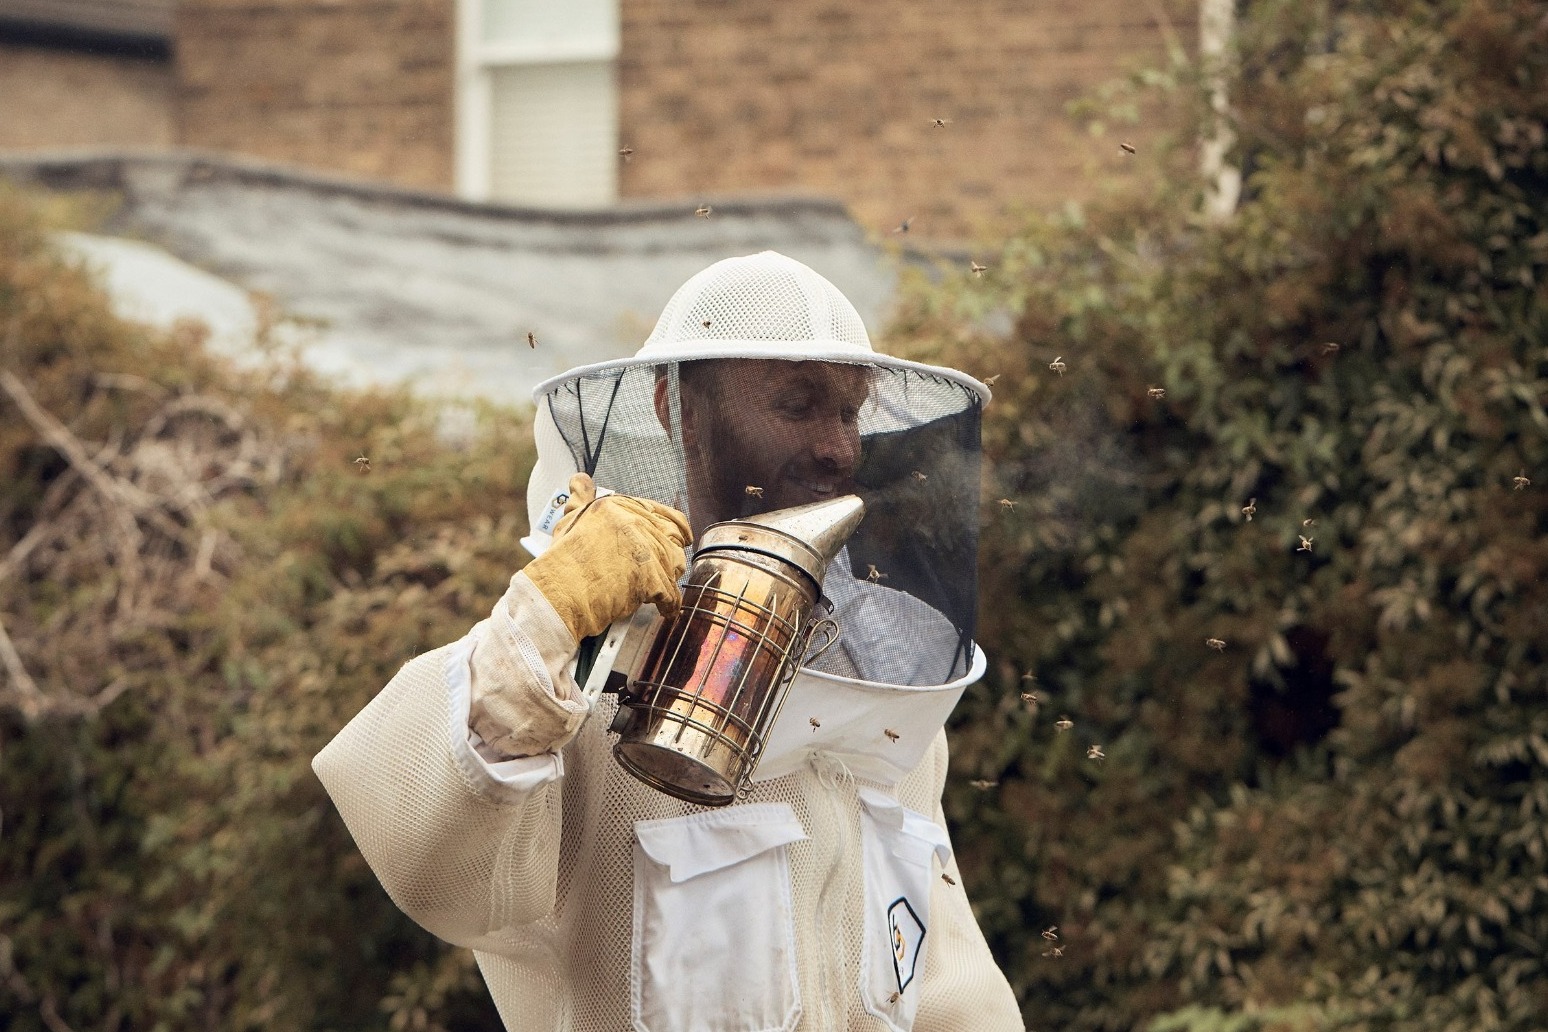 Beekeeping ‘breaks connection with trauma’ for refugees, says charity founded 